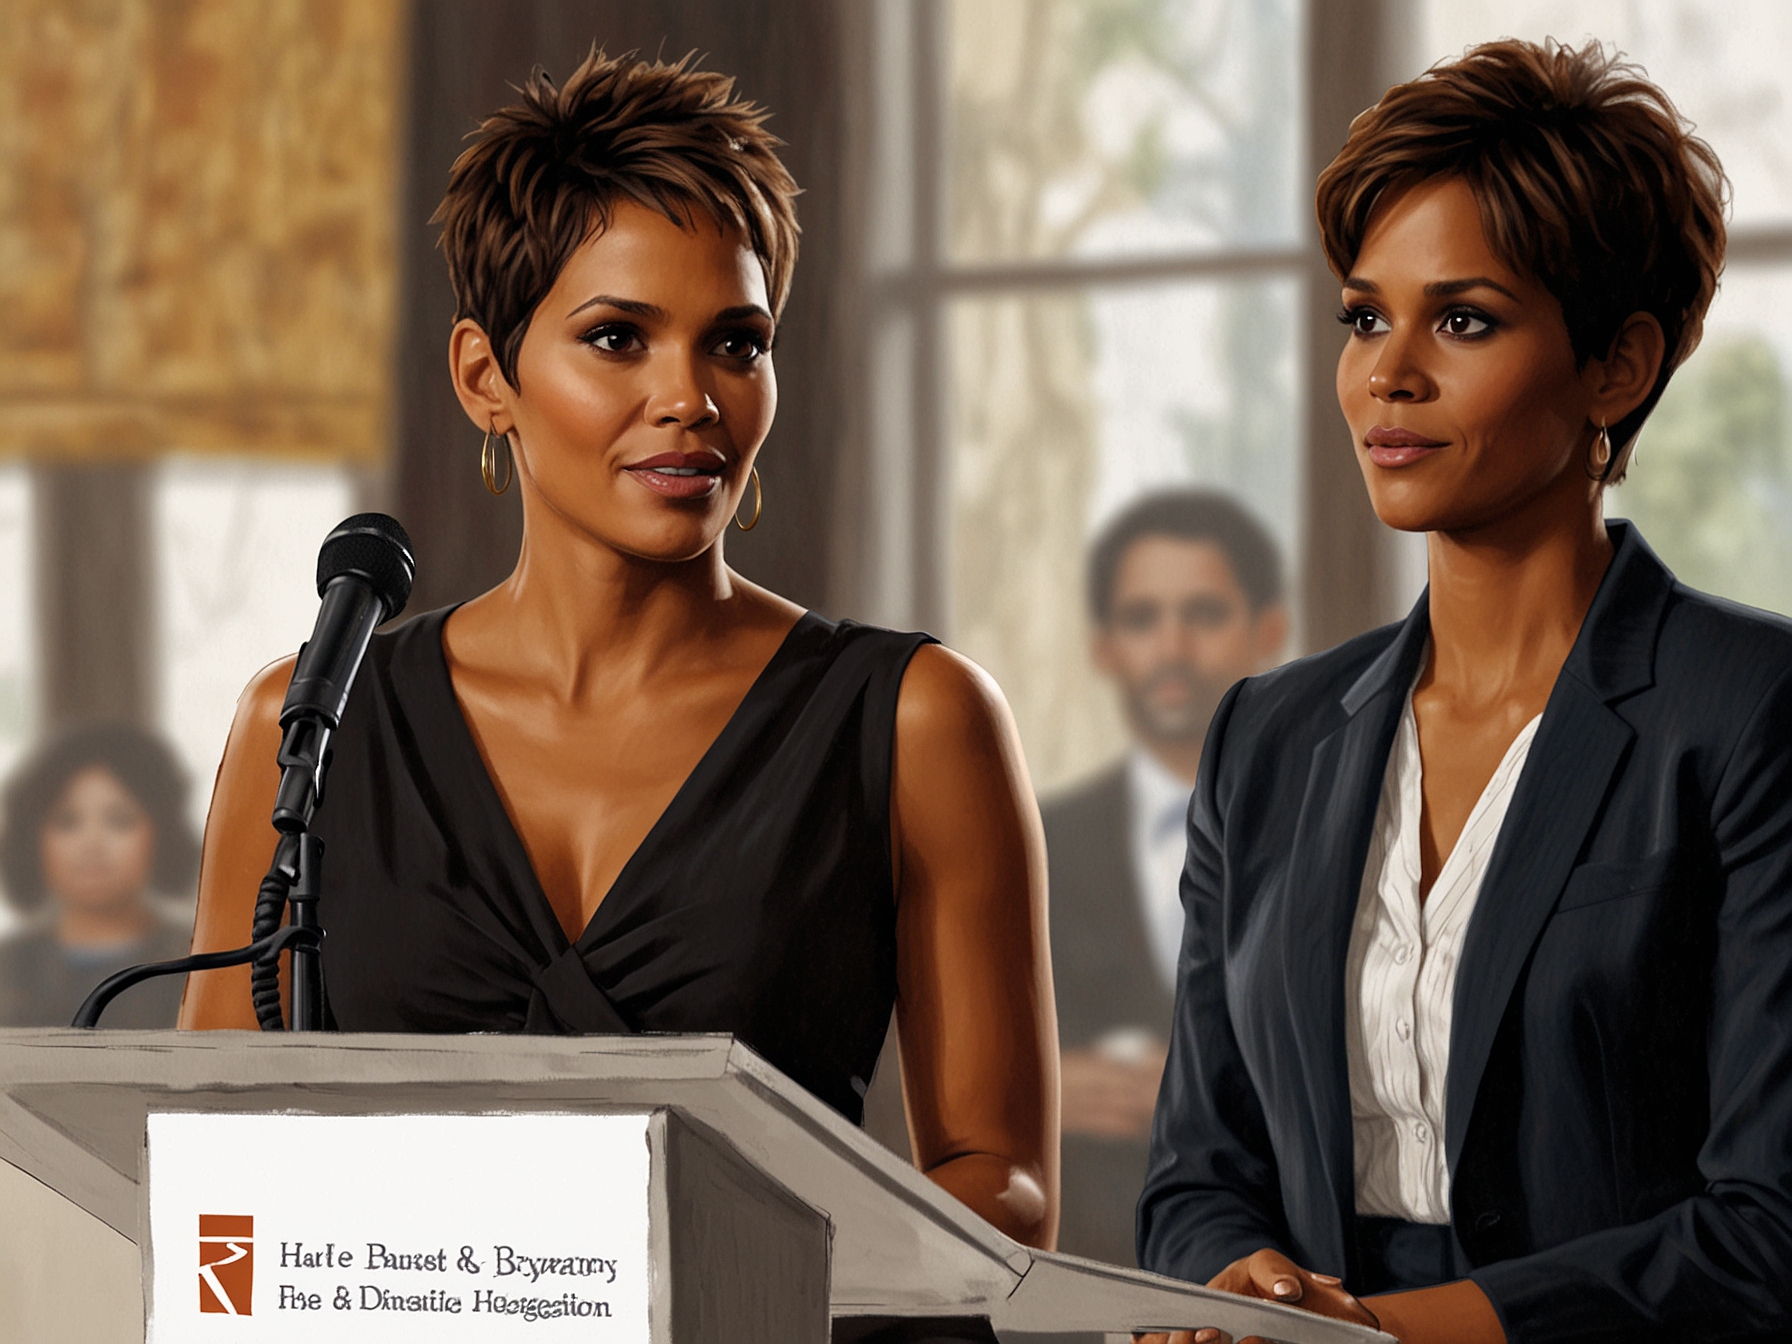 Halle Berry speaking at an event, passionately explaining her reasons for preferring domestic adoption over international adoption, emphasizing cultural and ethical considerations.